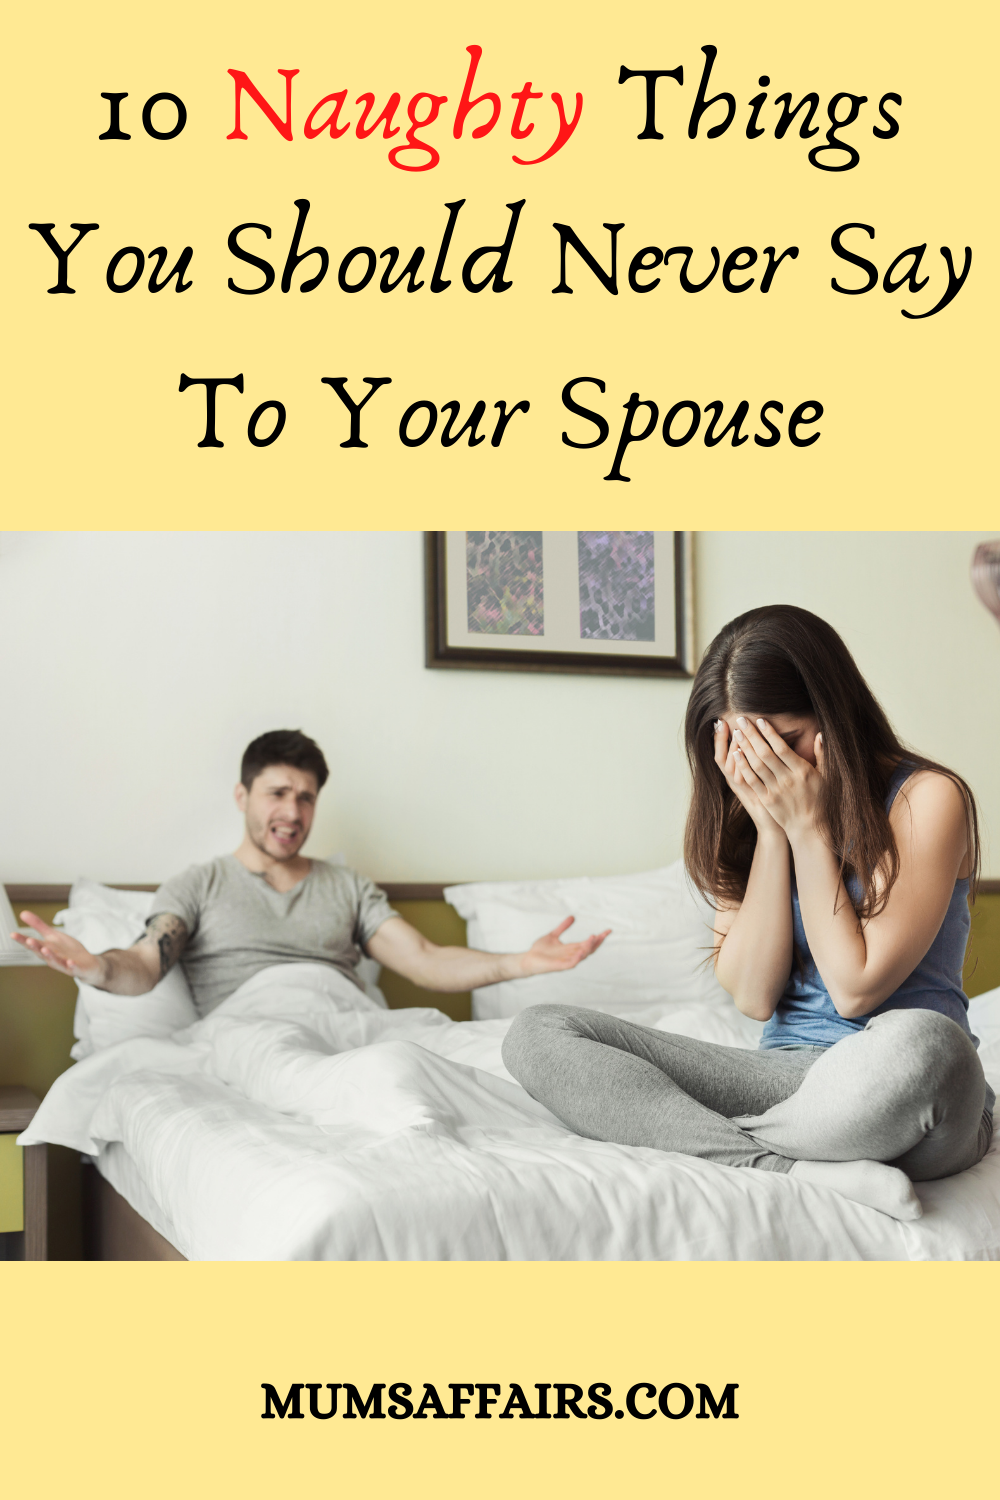 Silly Things You Should Never Say to Your Spouse